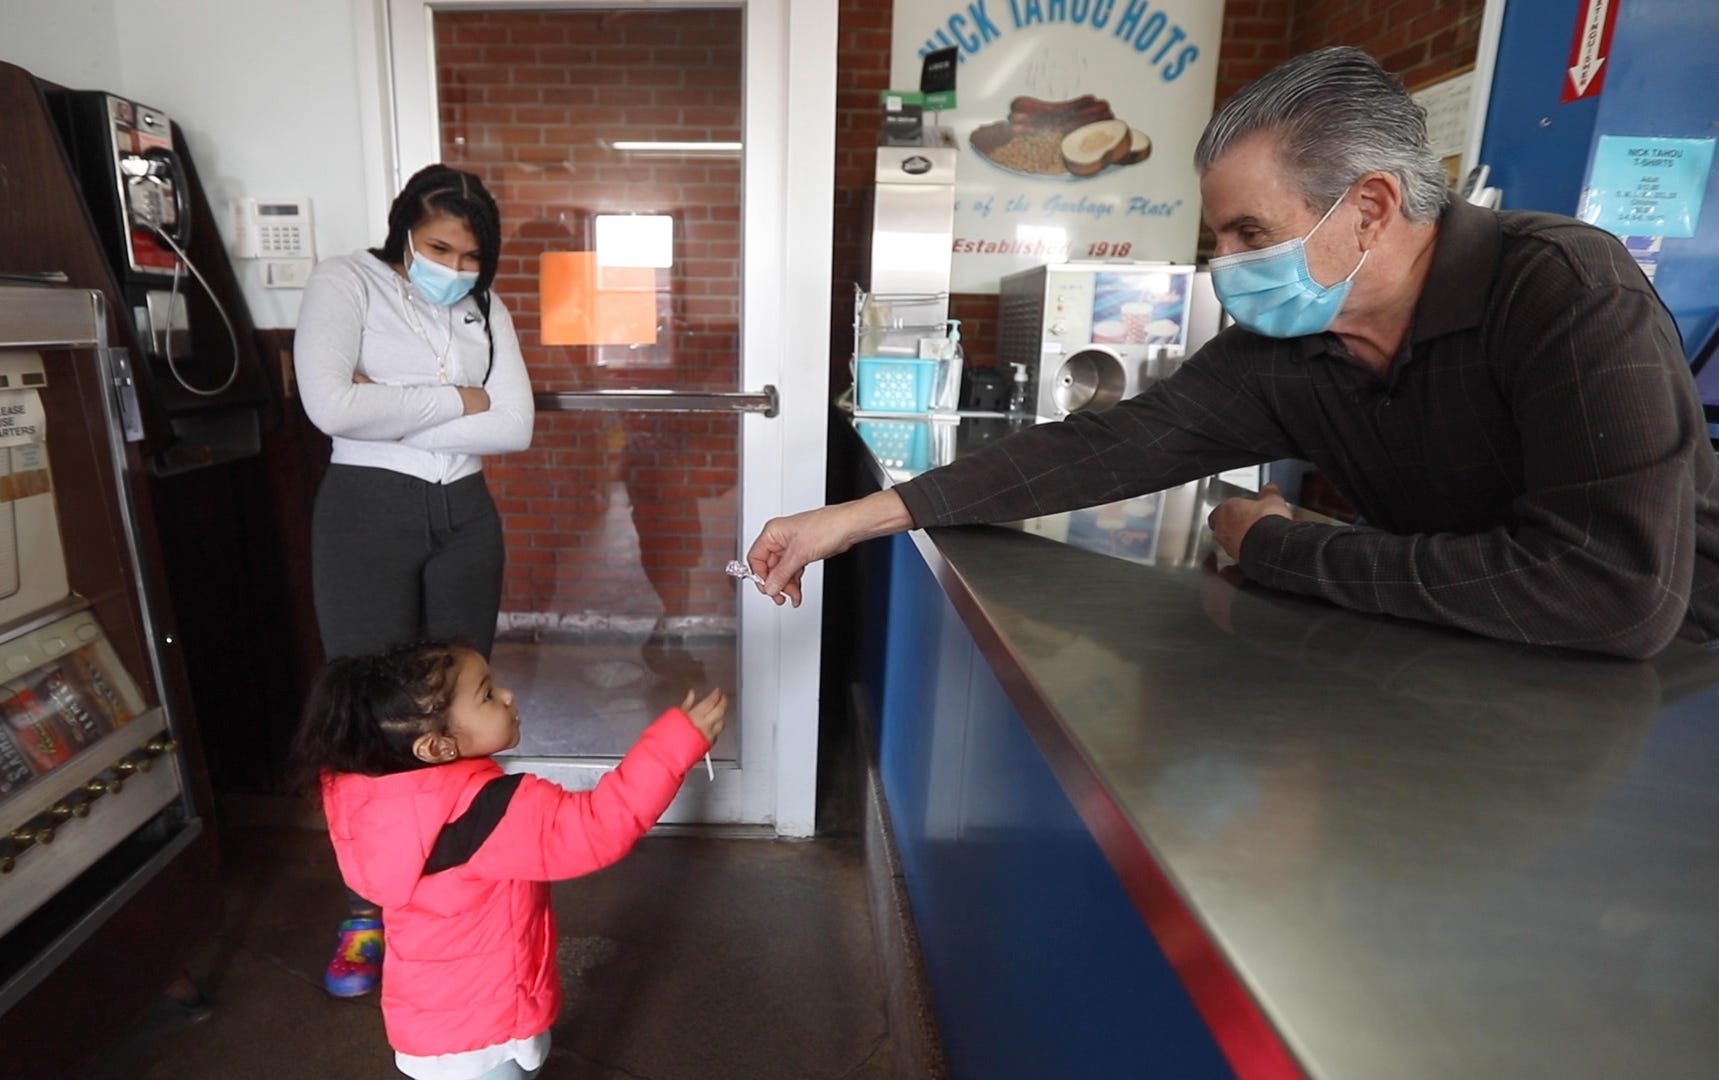 Alex Tahou, owner of Nick Tahou Hots, keeps lollipops on hand for little children. Here, he hands one to Amiyah Peters as her mom, Alexis Reed of Rochester, tells Tahou that the free lollipops are what her daughter remembers most about the restaurant.